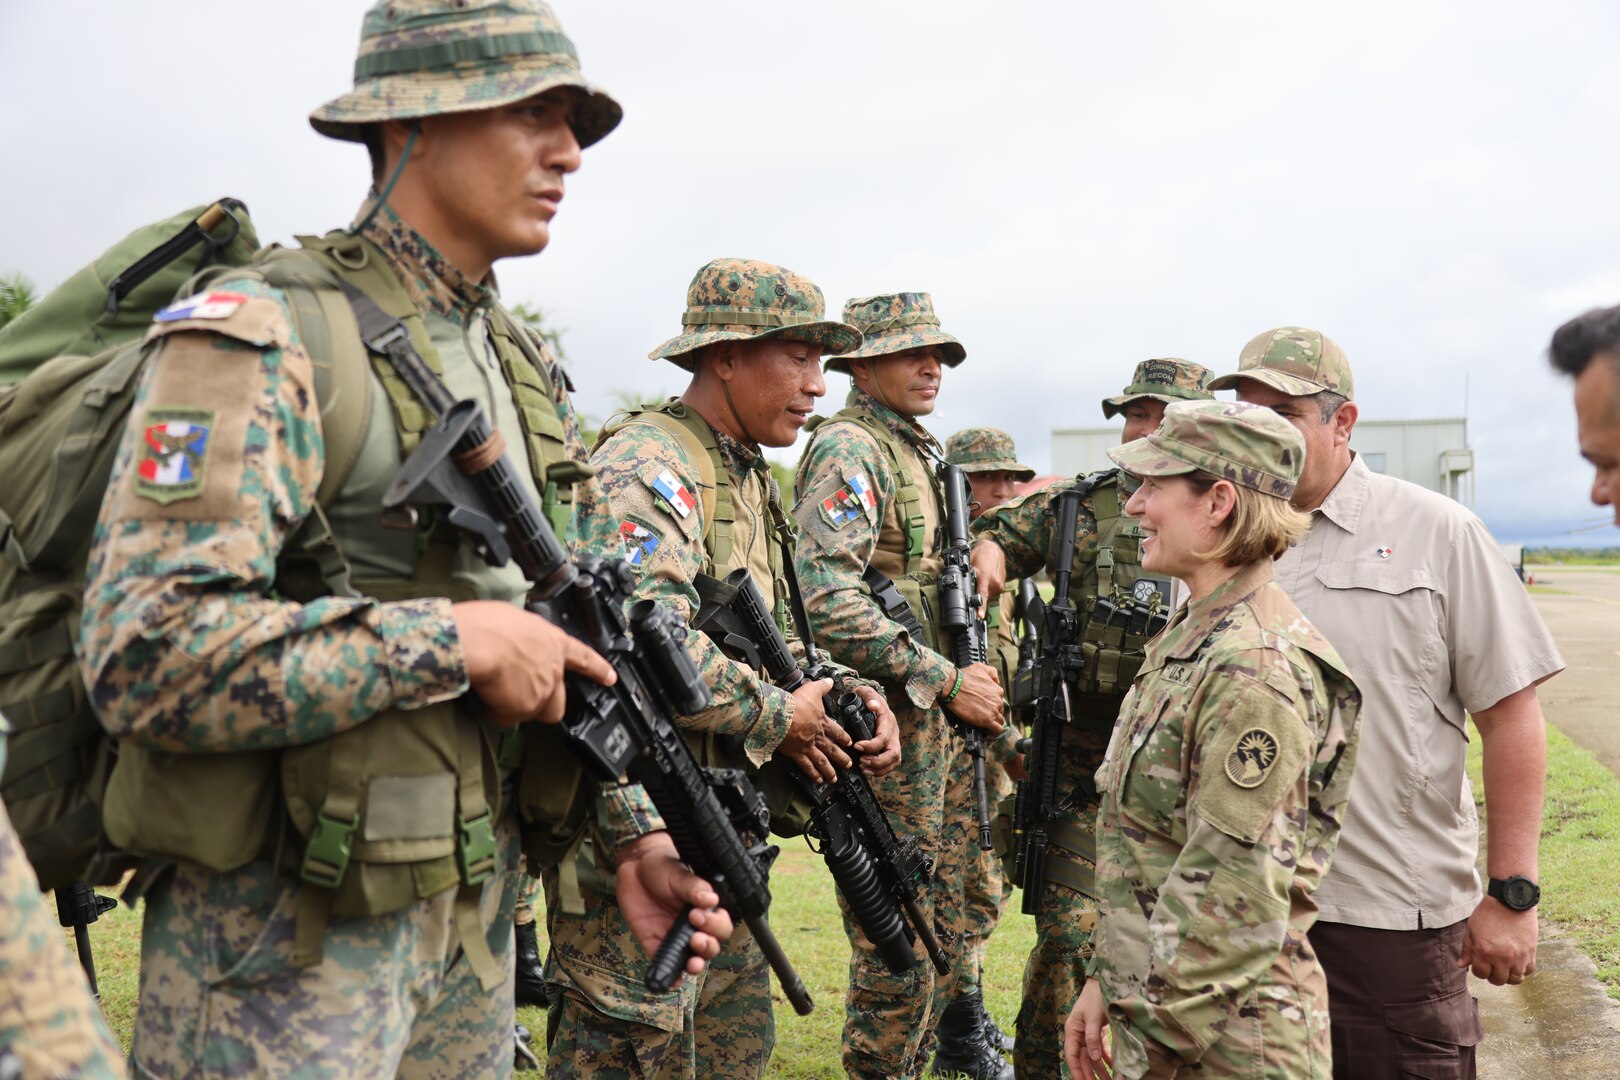 The commander of U.S. Southern Command, U.S. Army Gen. Laura Richardson, accompanies Panama’s Minister of Public Security Juan Pino to visit with Panamanian security forces operating in the Darién Gap